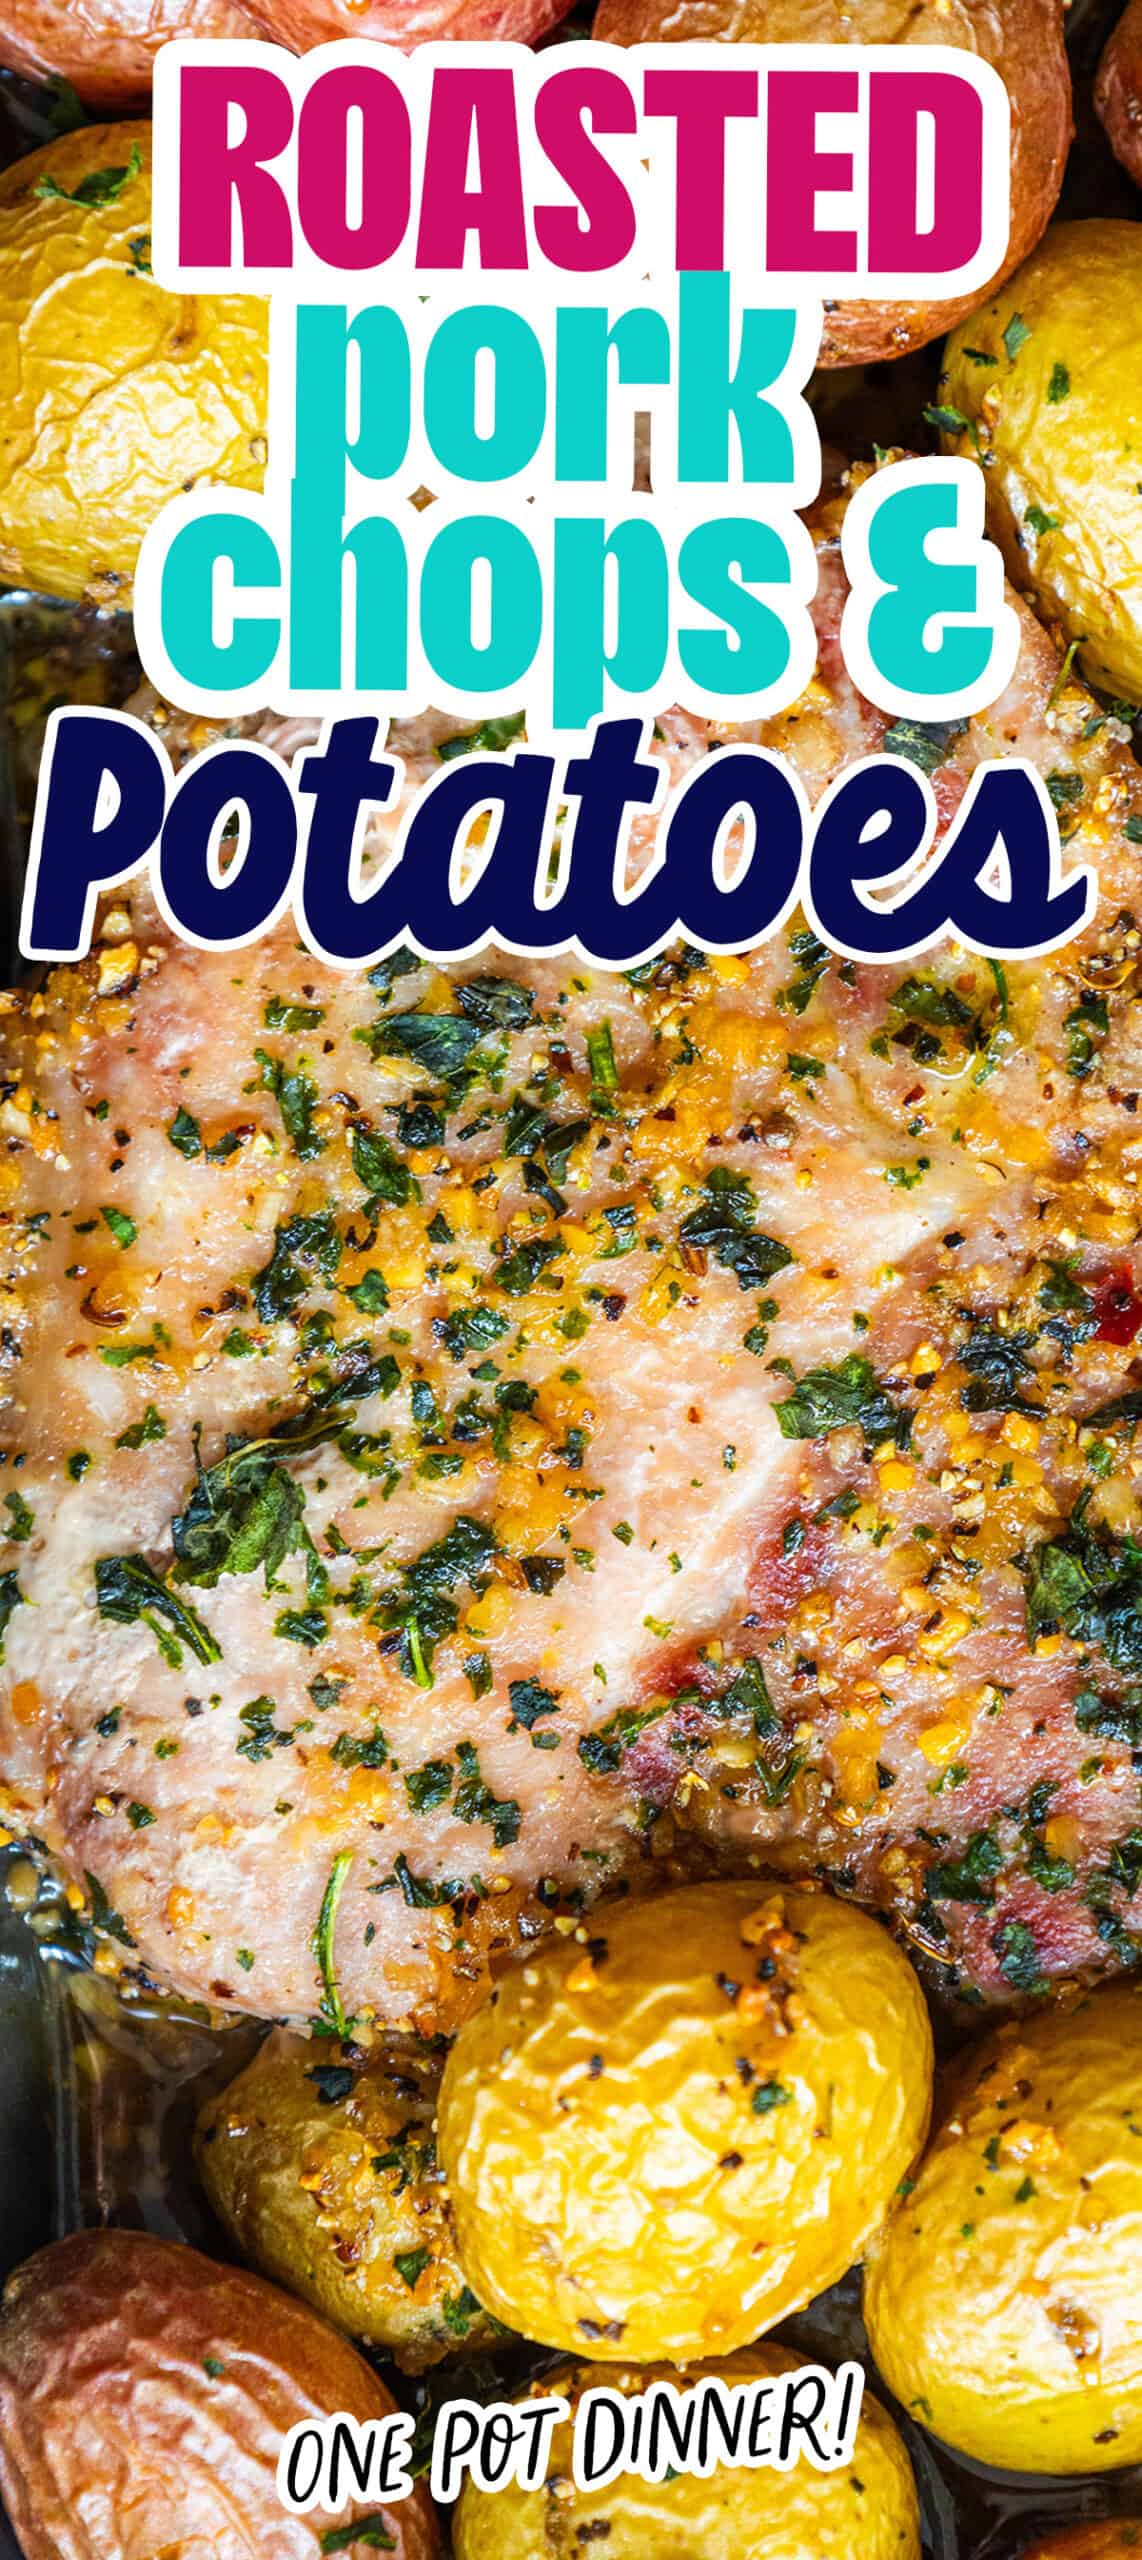 Deliciously seasoned roasted pork chops served with tender potatoes.